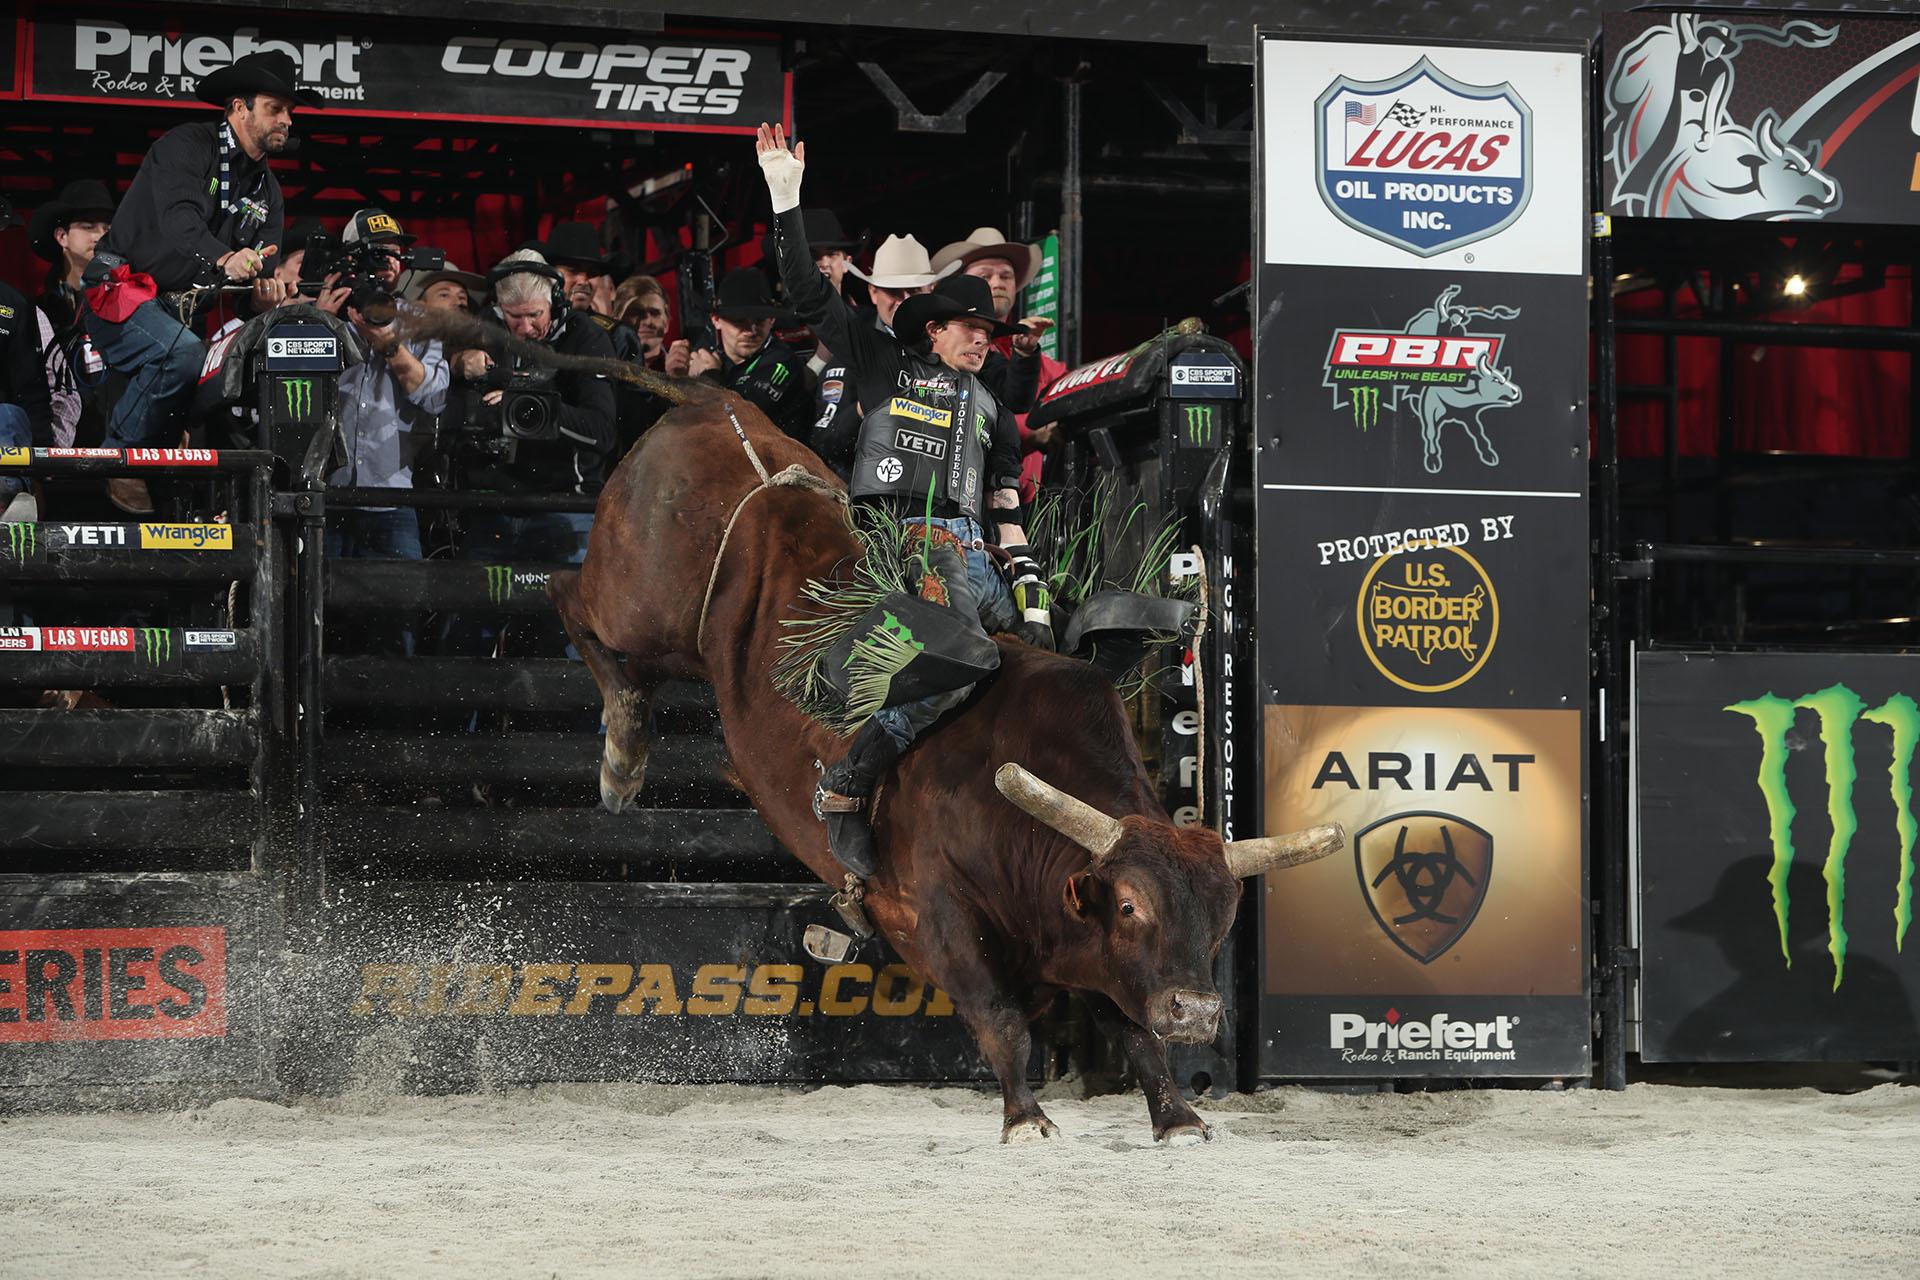 JB Mauney rides during the second round of the 2019 Chicago PBR Unleash The Beast. (Photo by Andy Watson, BullStock Media)